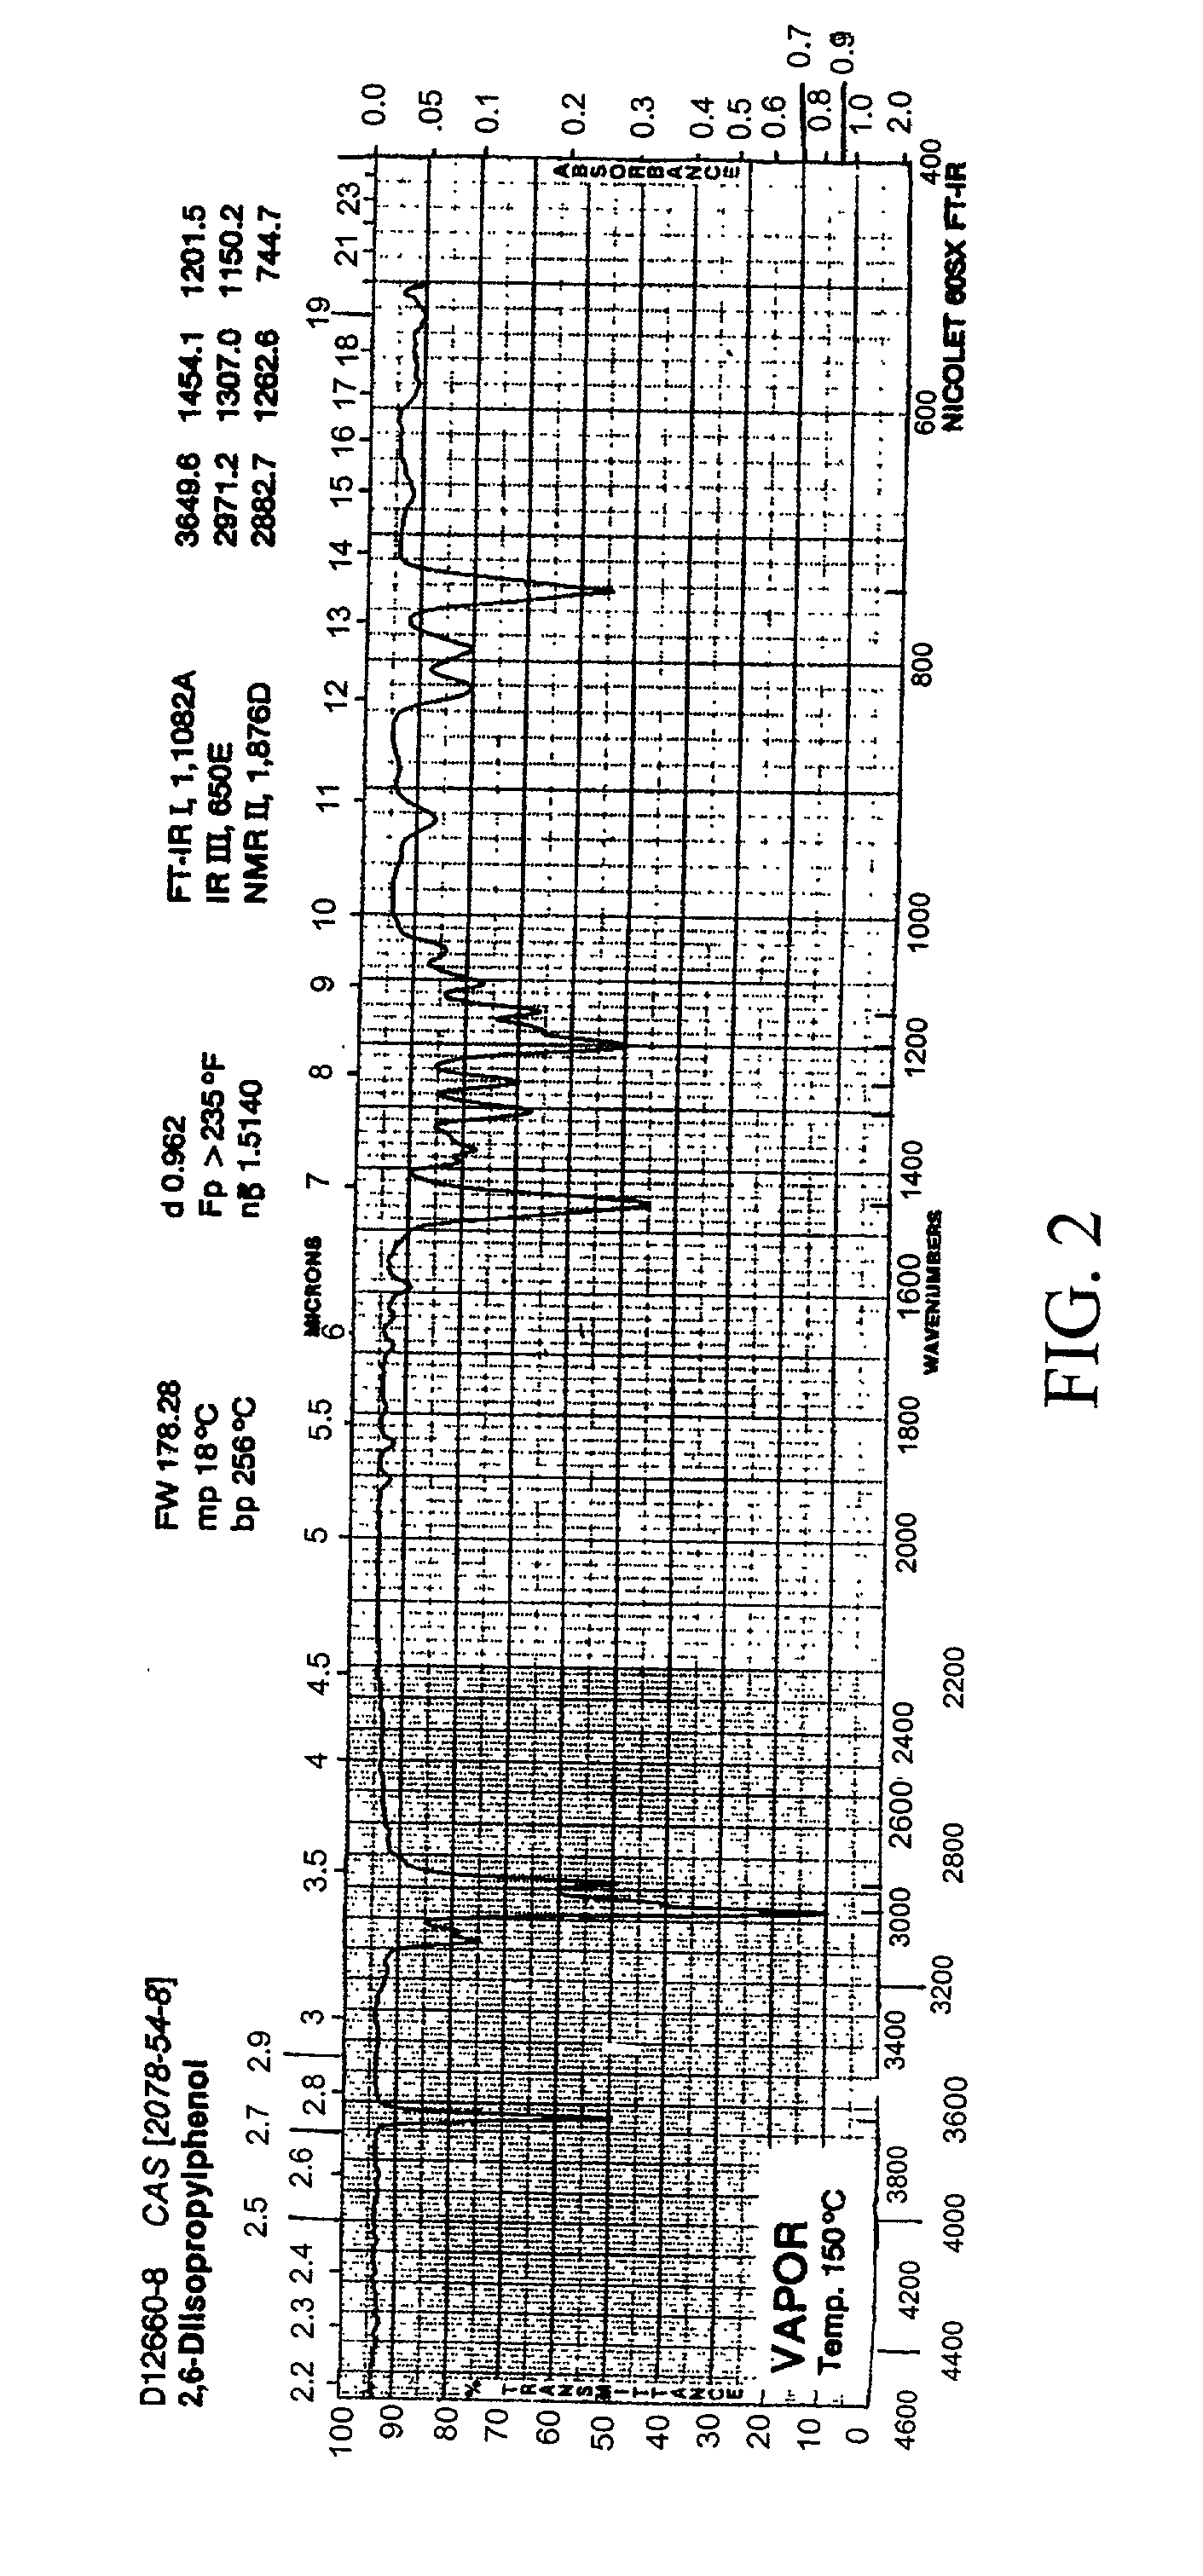 Method and apparatus for monitoring respiratory gases during anesthesia